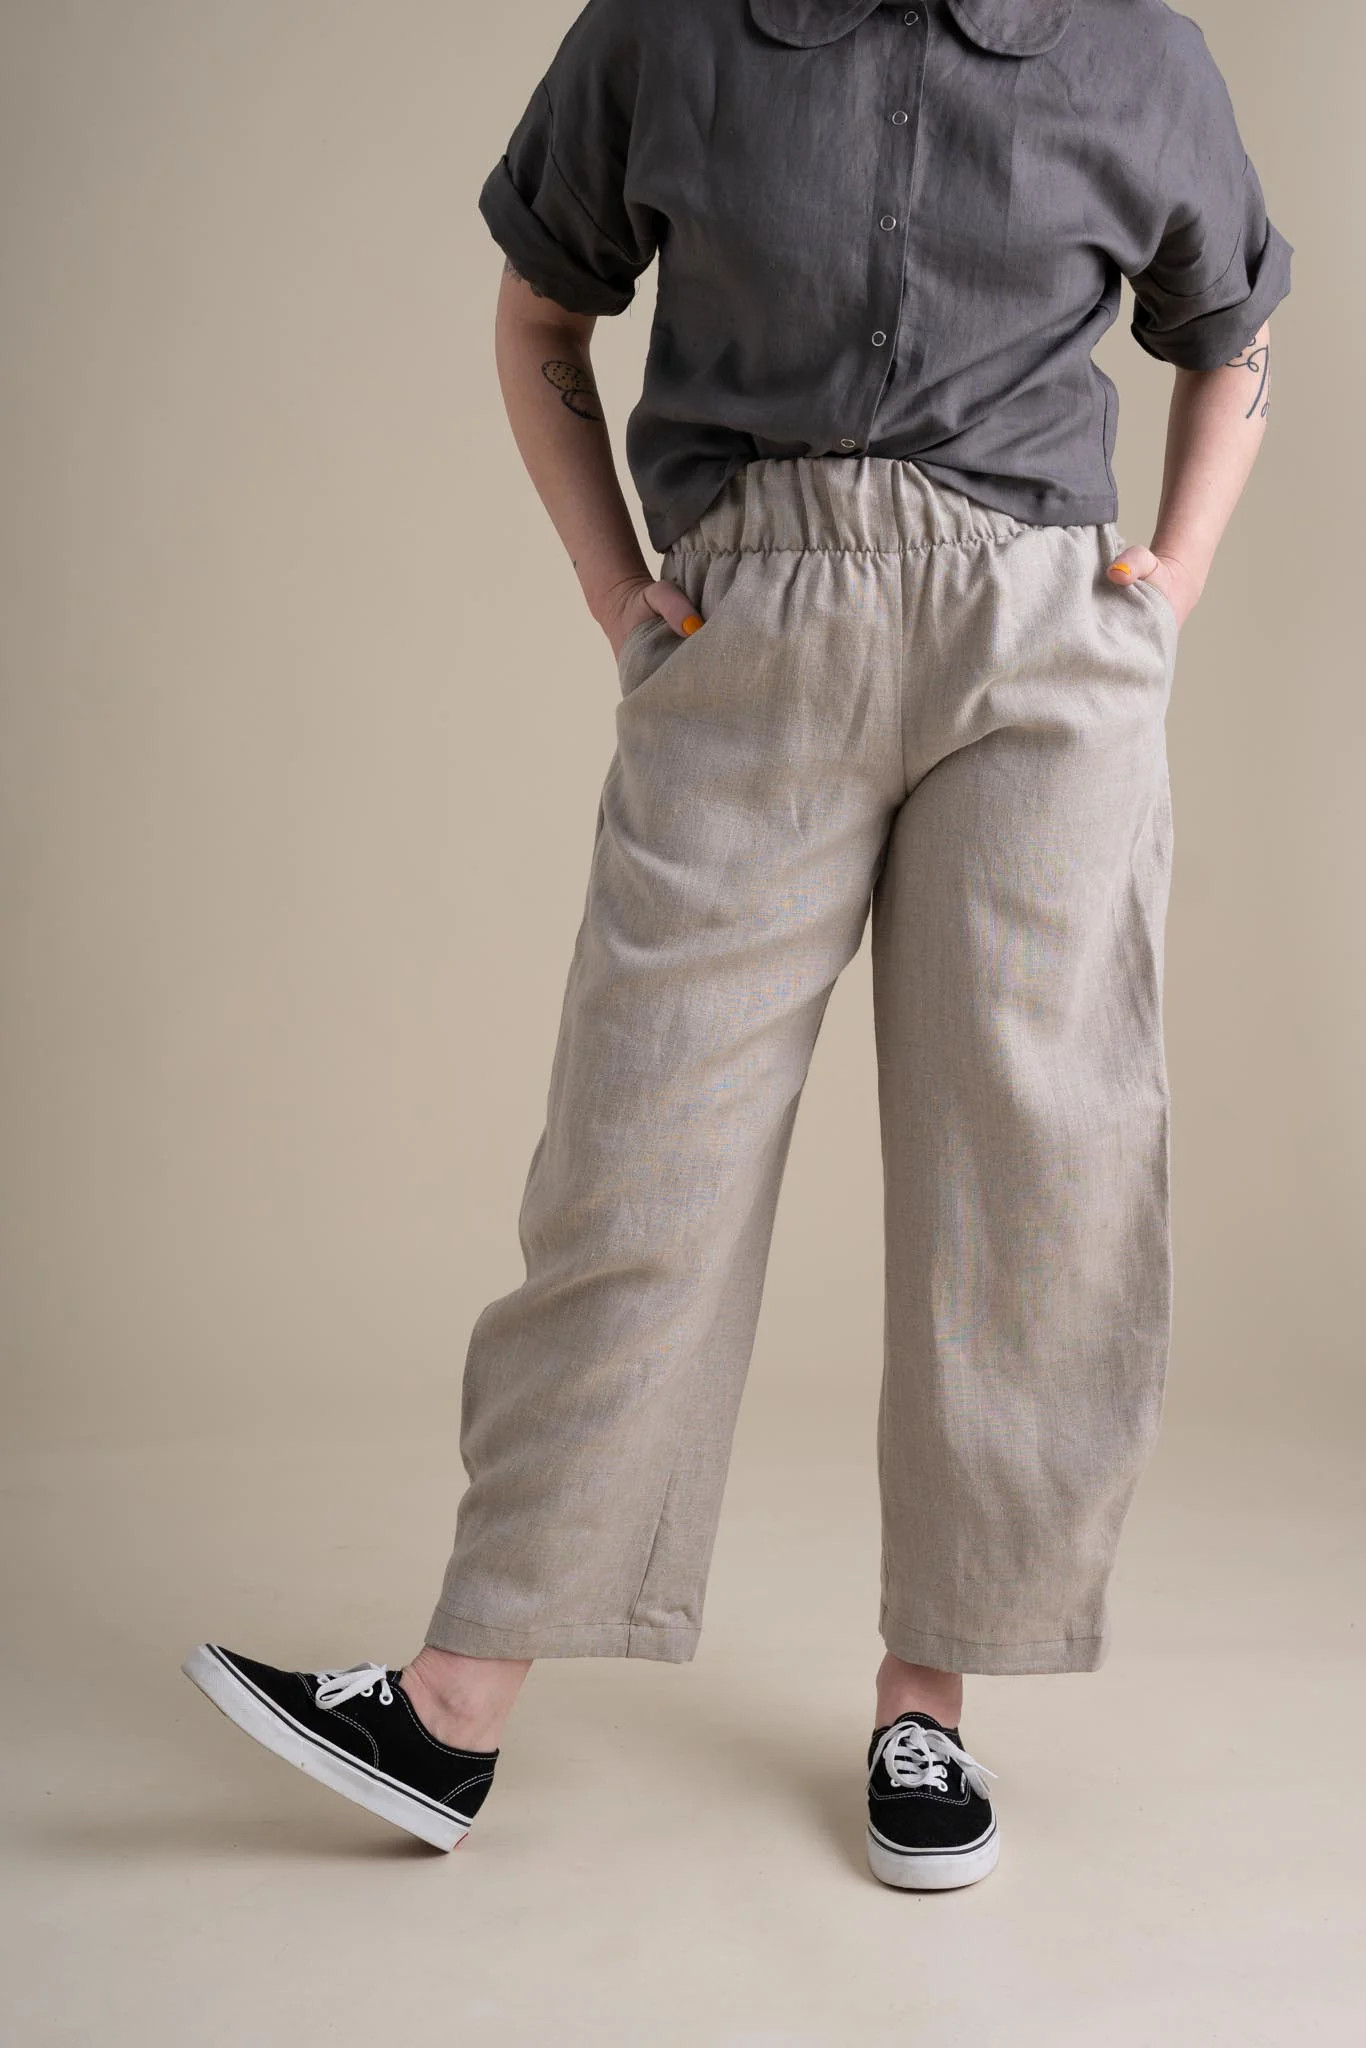 Crescent Moon Pants in Pebble | Conscious Clothing